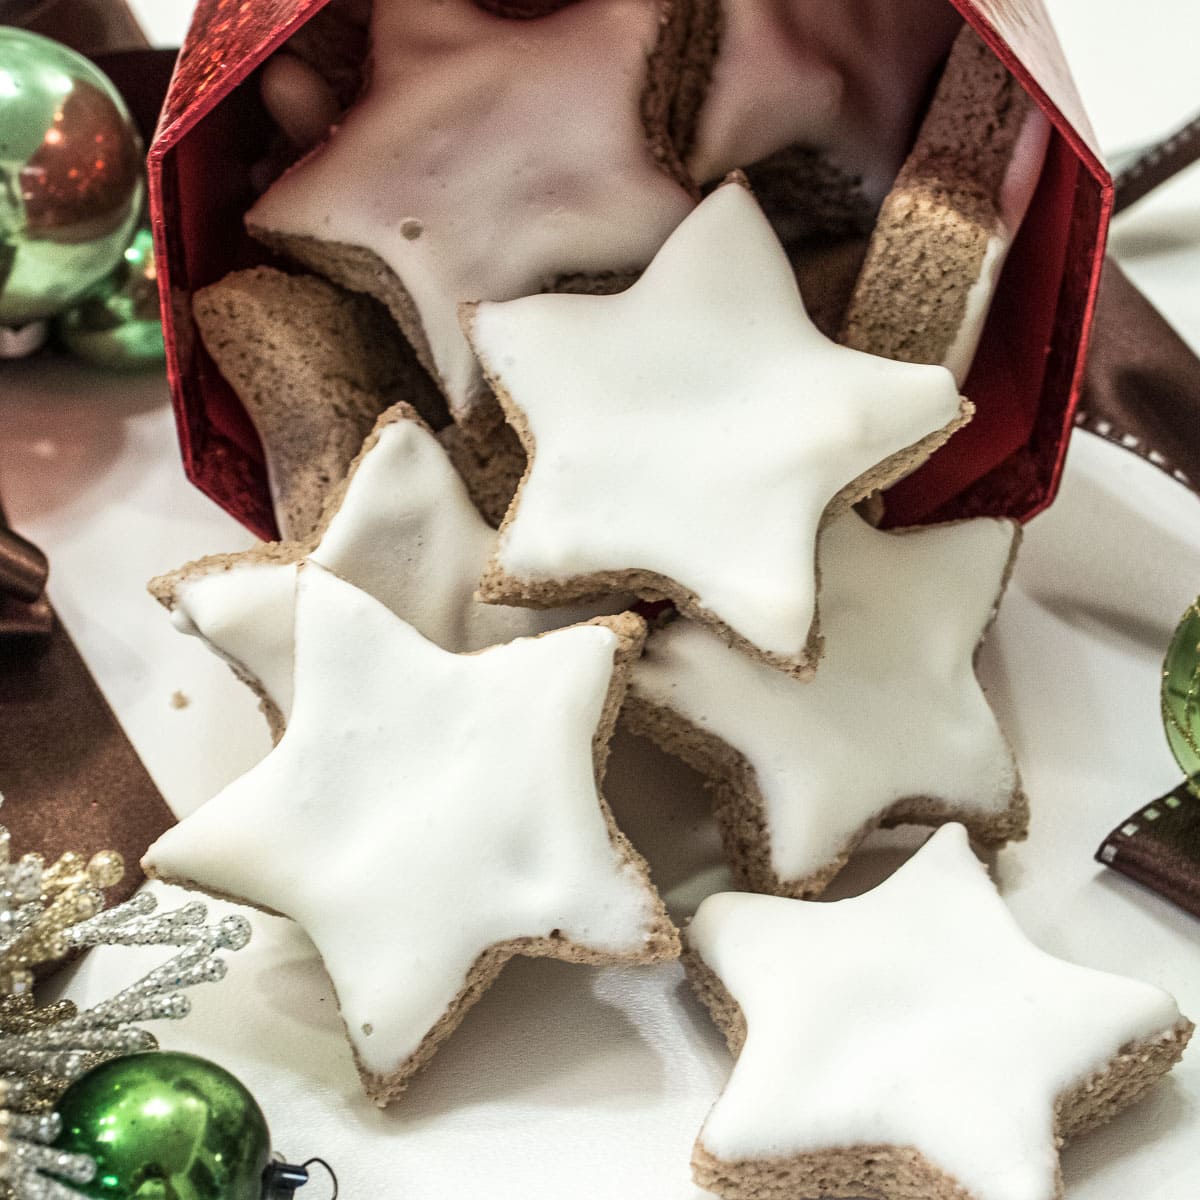 White, star shaped cinnamon Zimtsterne cookies are flowing fro a container surounded by holiday ornaments.  